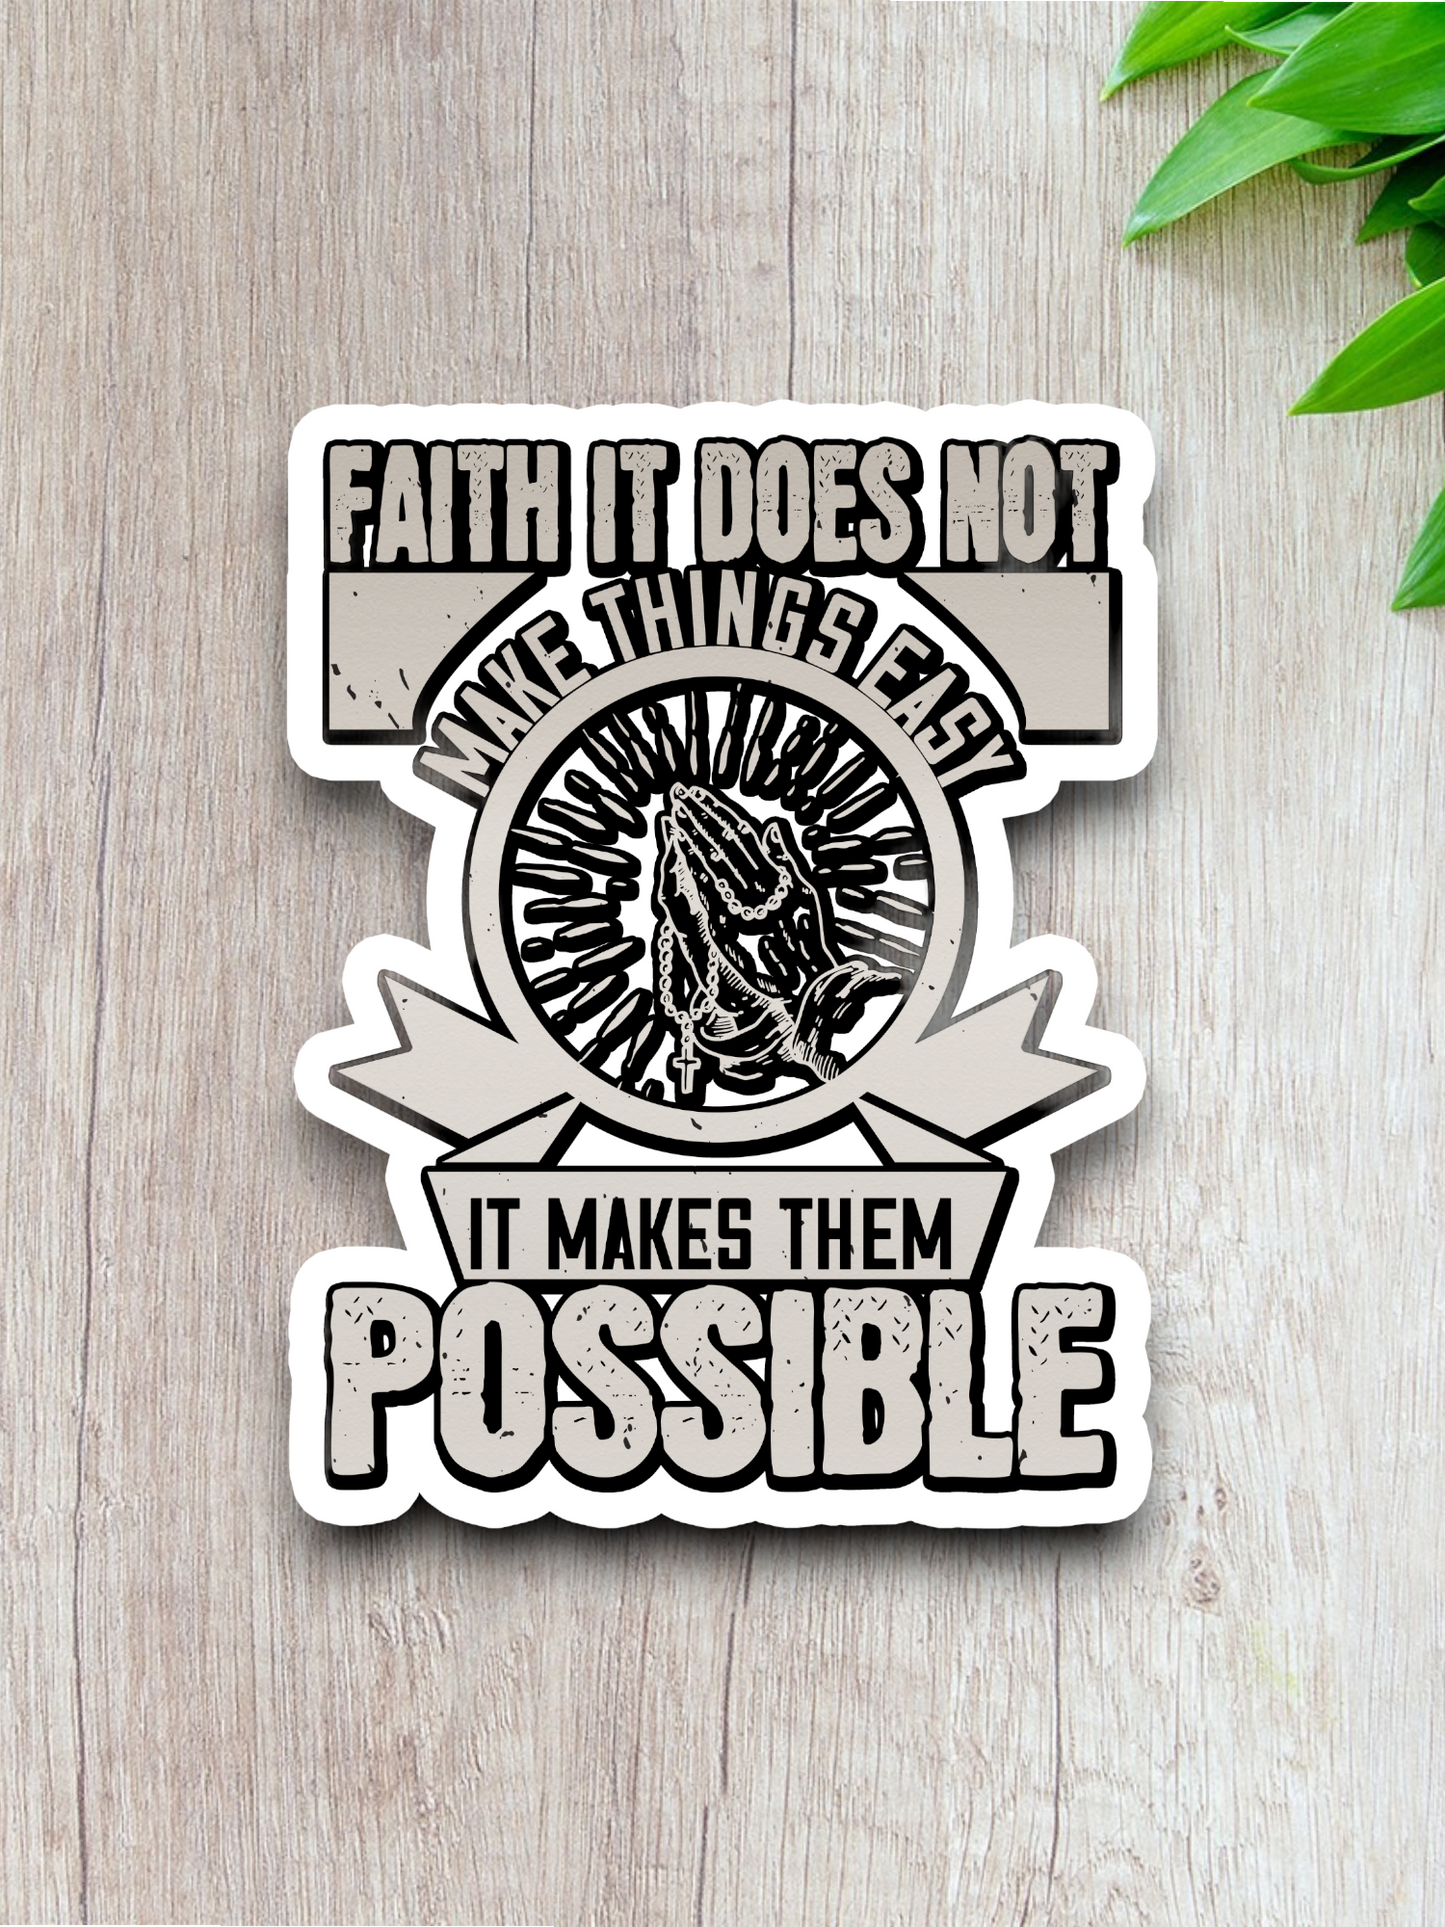 Faith It Does Not Make Things Easy - Version 02 - Faith Sticker